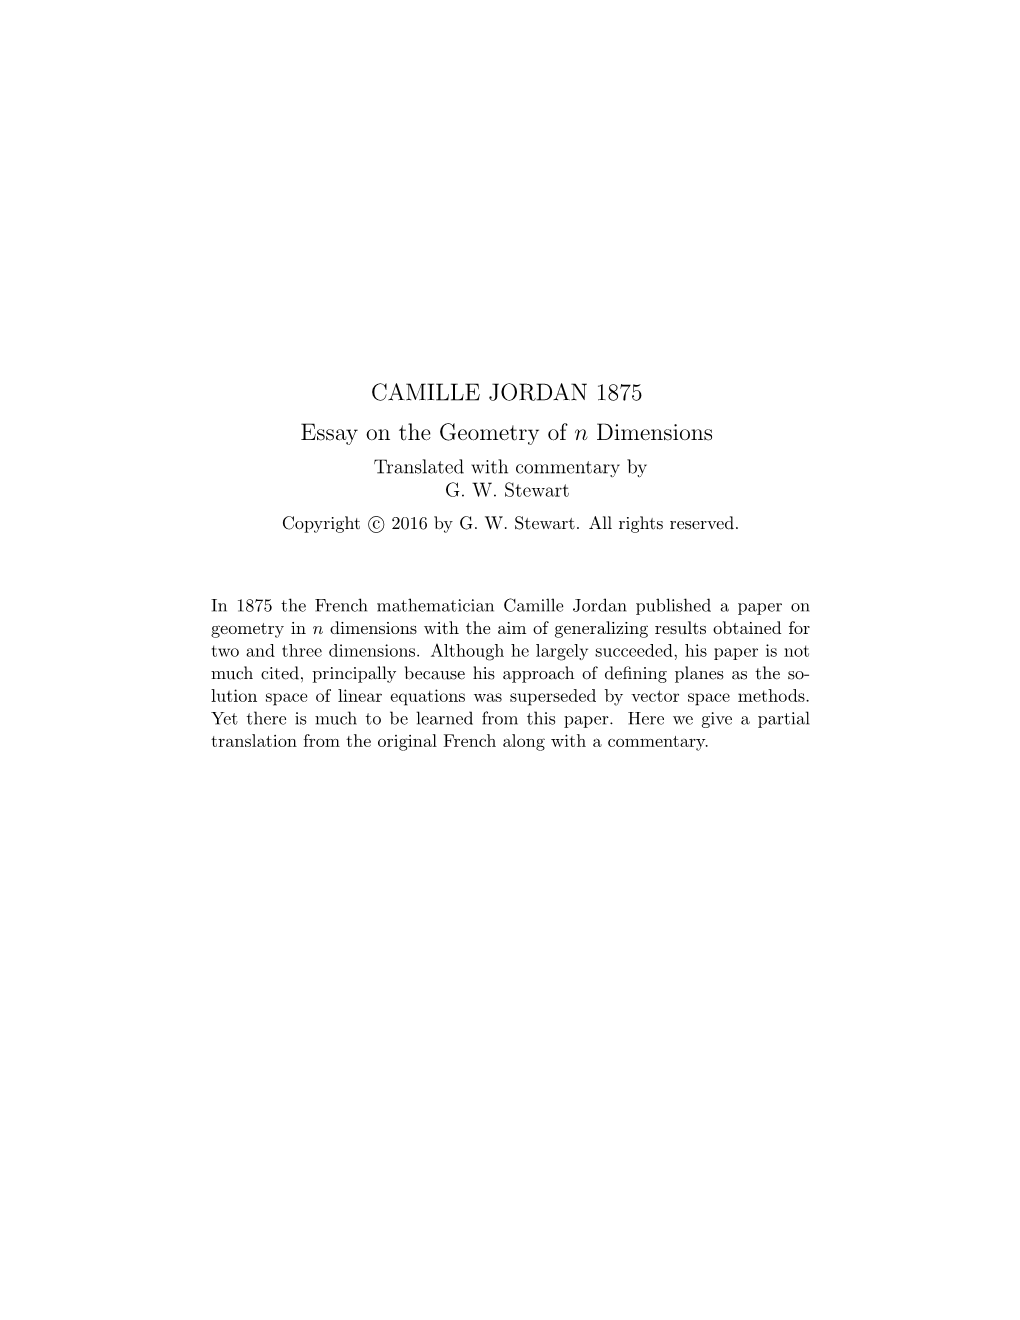 CAMILLE JORDAN 1875 Essay on the Geometry of N Dimensions Translated with Commentary by G